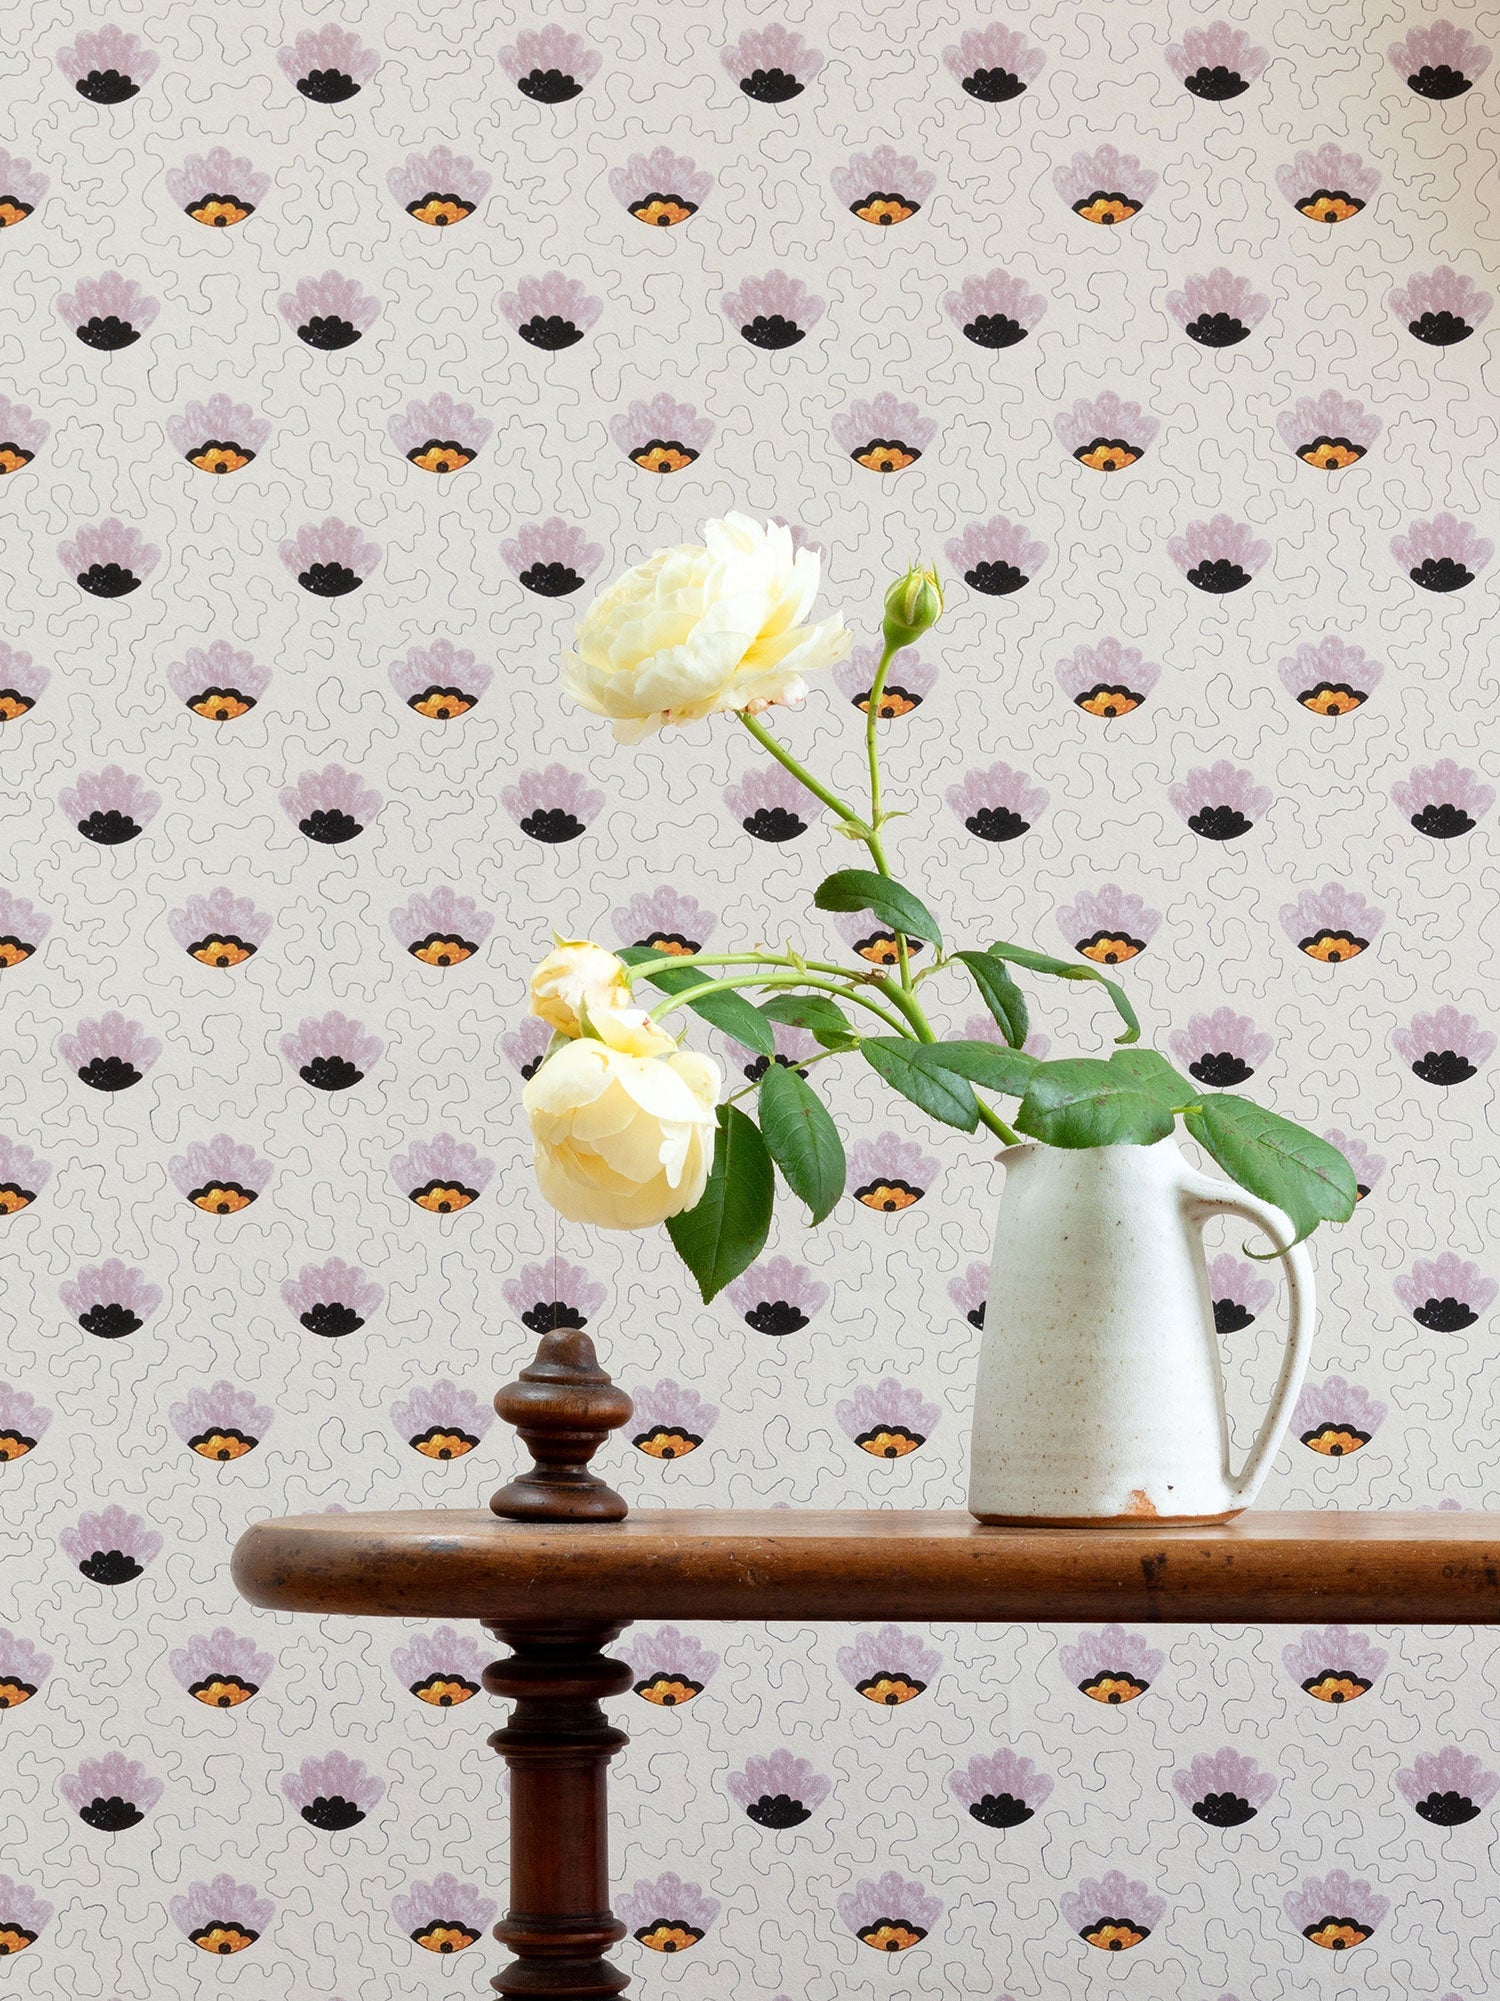 Pink pop art wallpaper with anthropomorphic eyes, pictured with roses